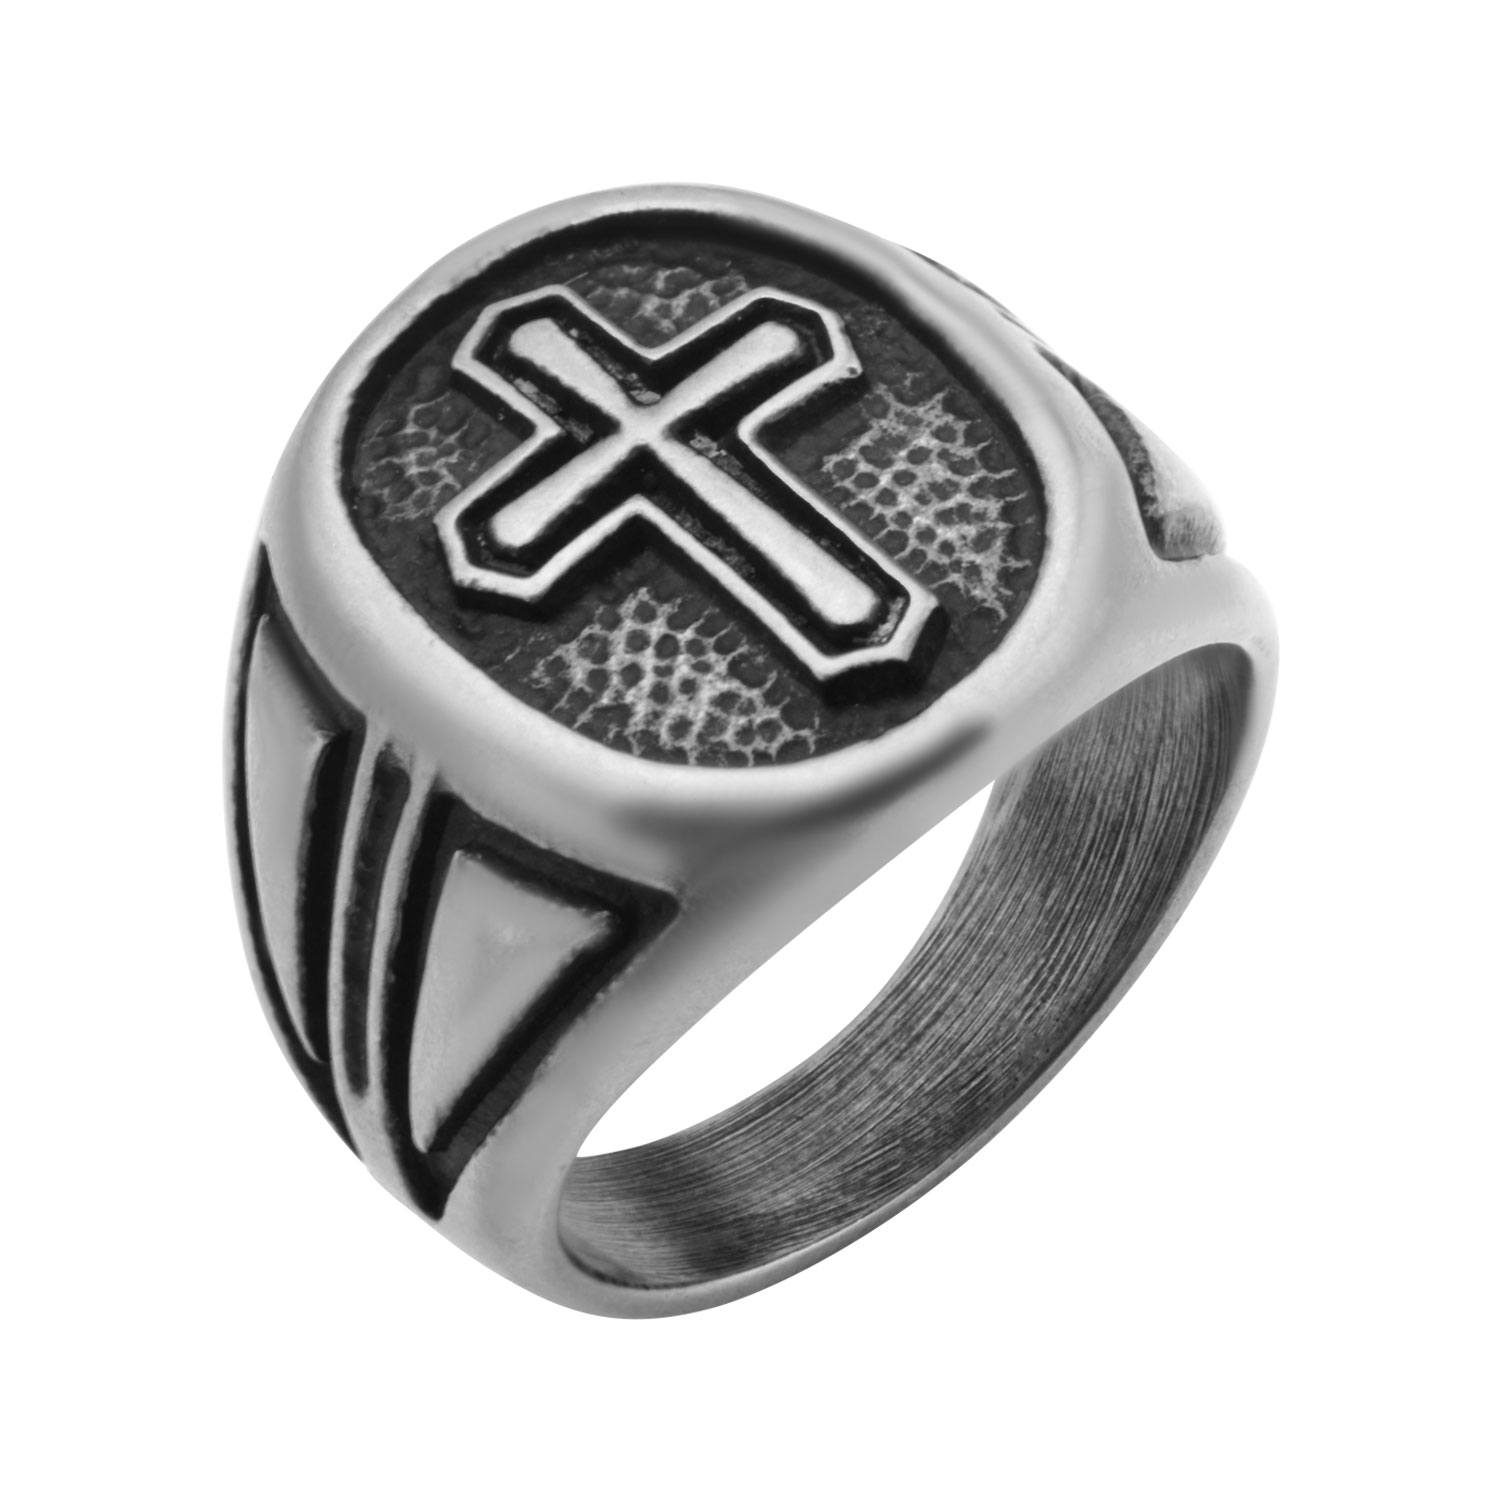 Antique Stainless Steel Cross Ring Image 3 Lewis Jewelers, Inc. Ansonia, CT